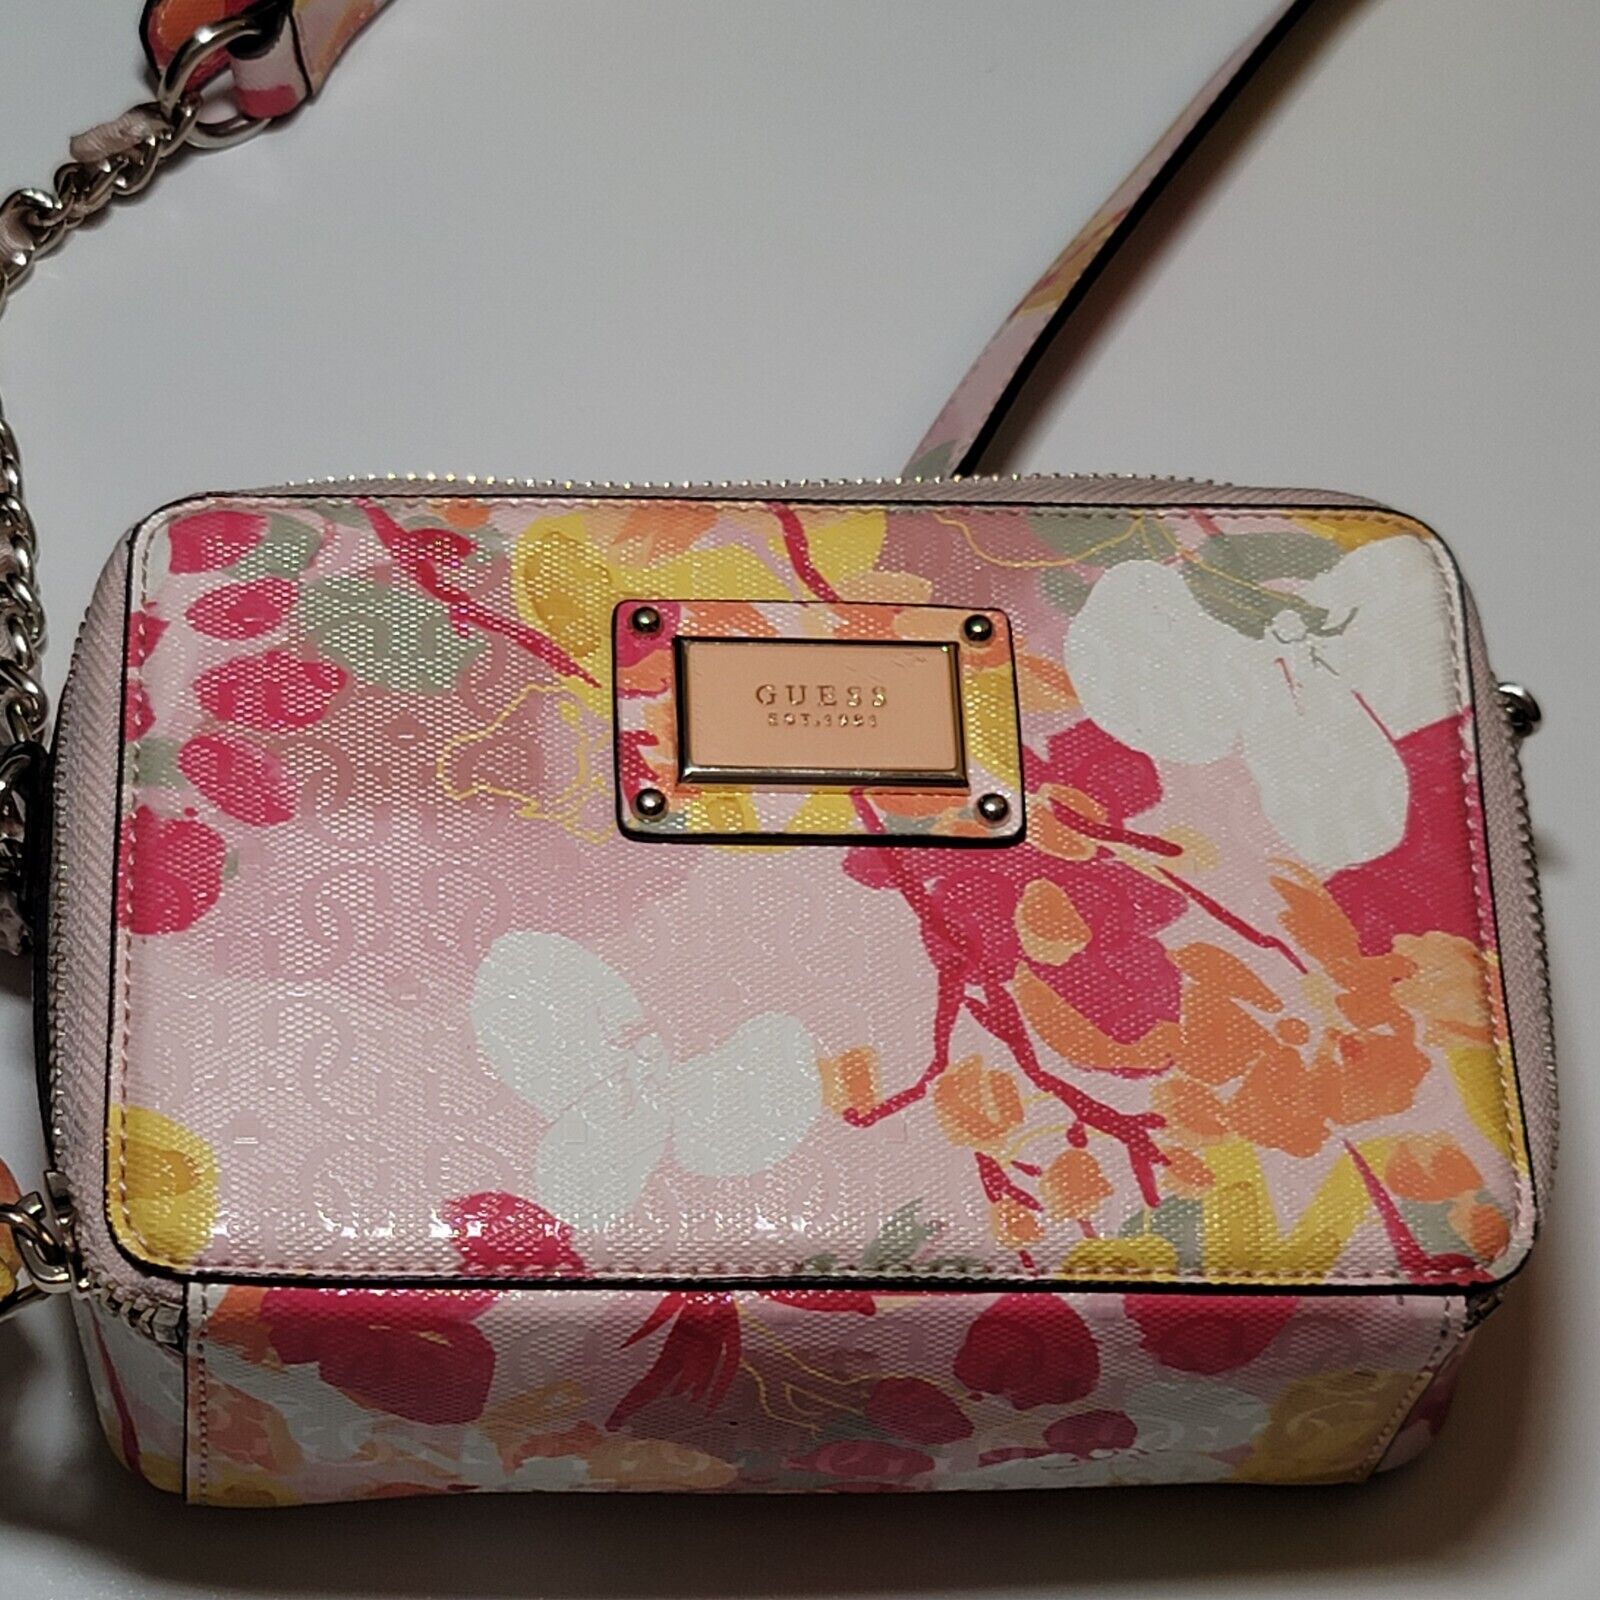 Shannon Crossbody Bag by Guess Floral Design 8" x… - image 9